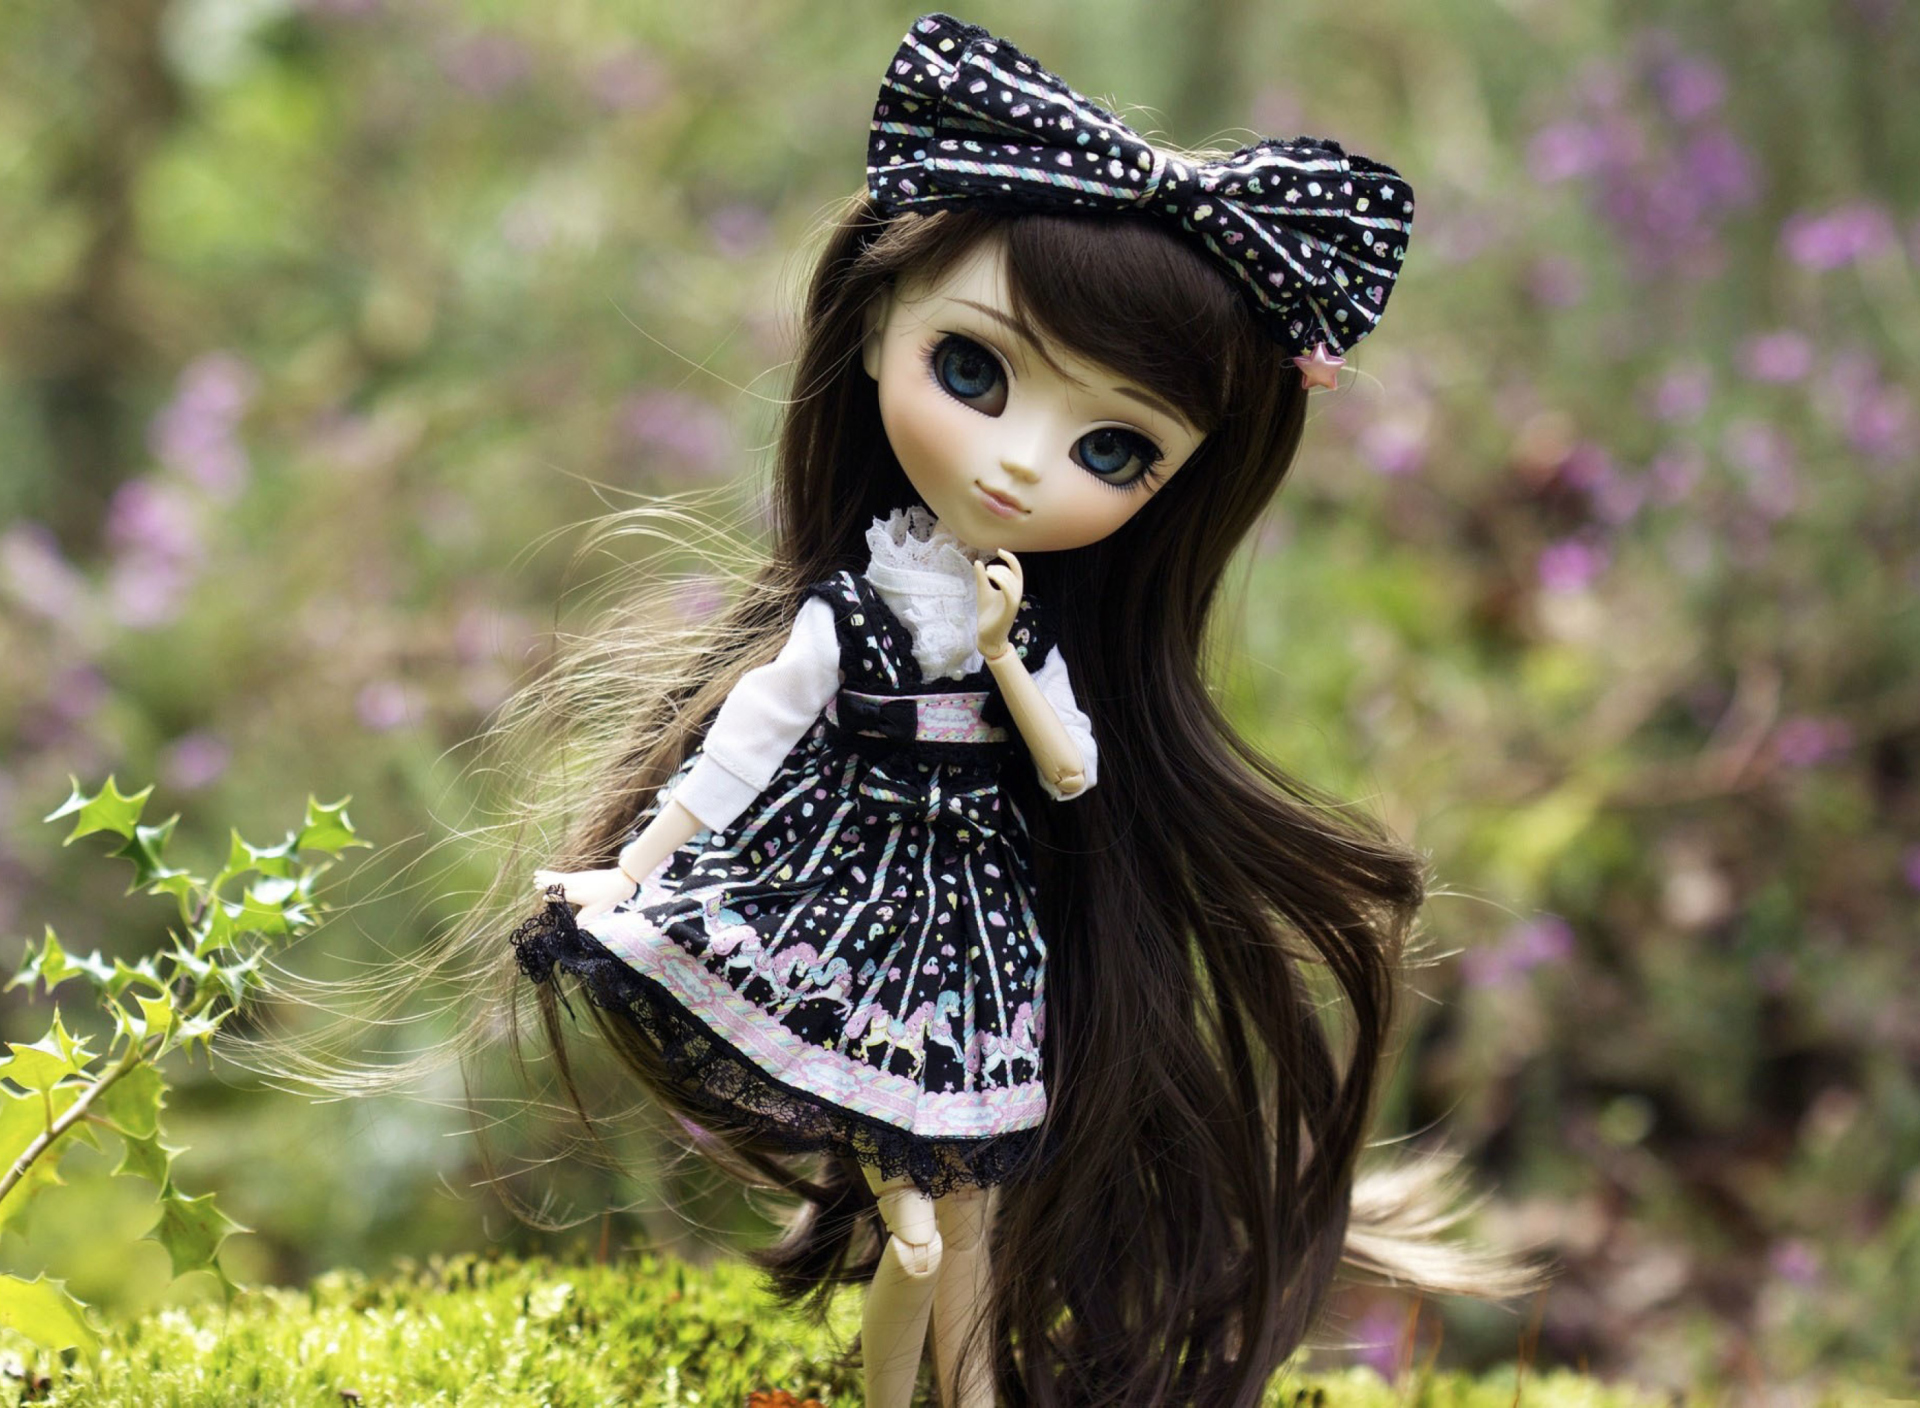 Cute Doll With Dark Hair And Black Bow wallpaper 1920x1408